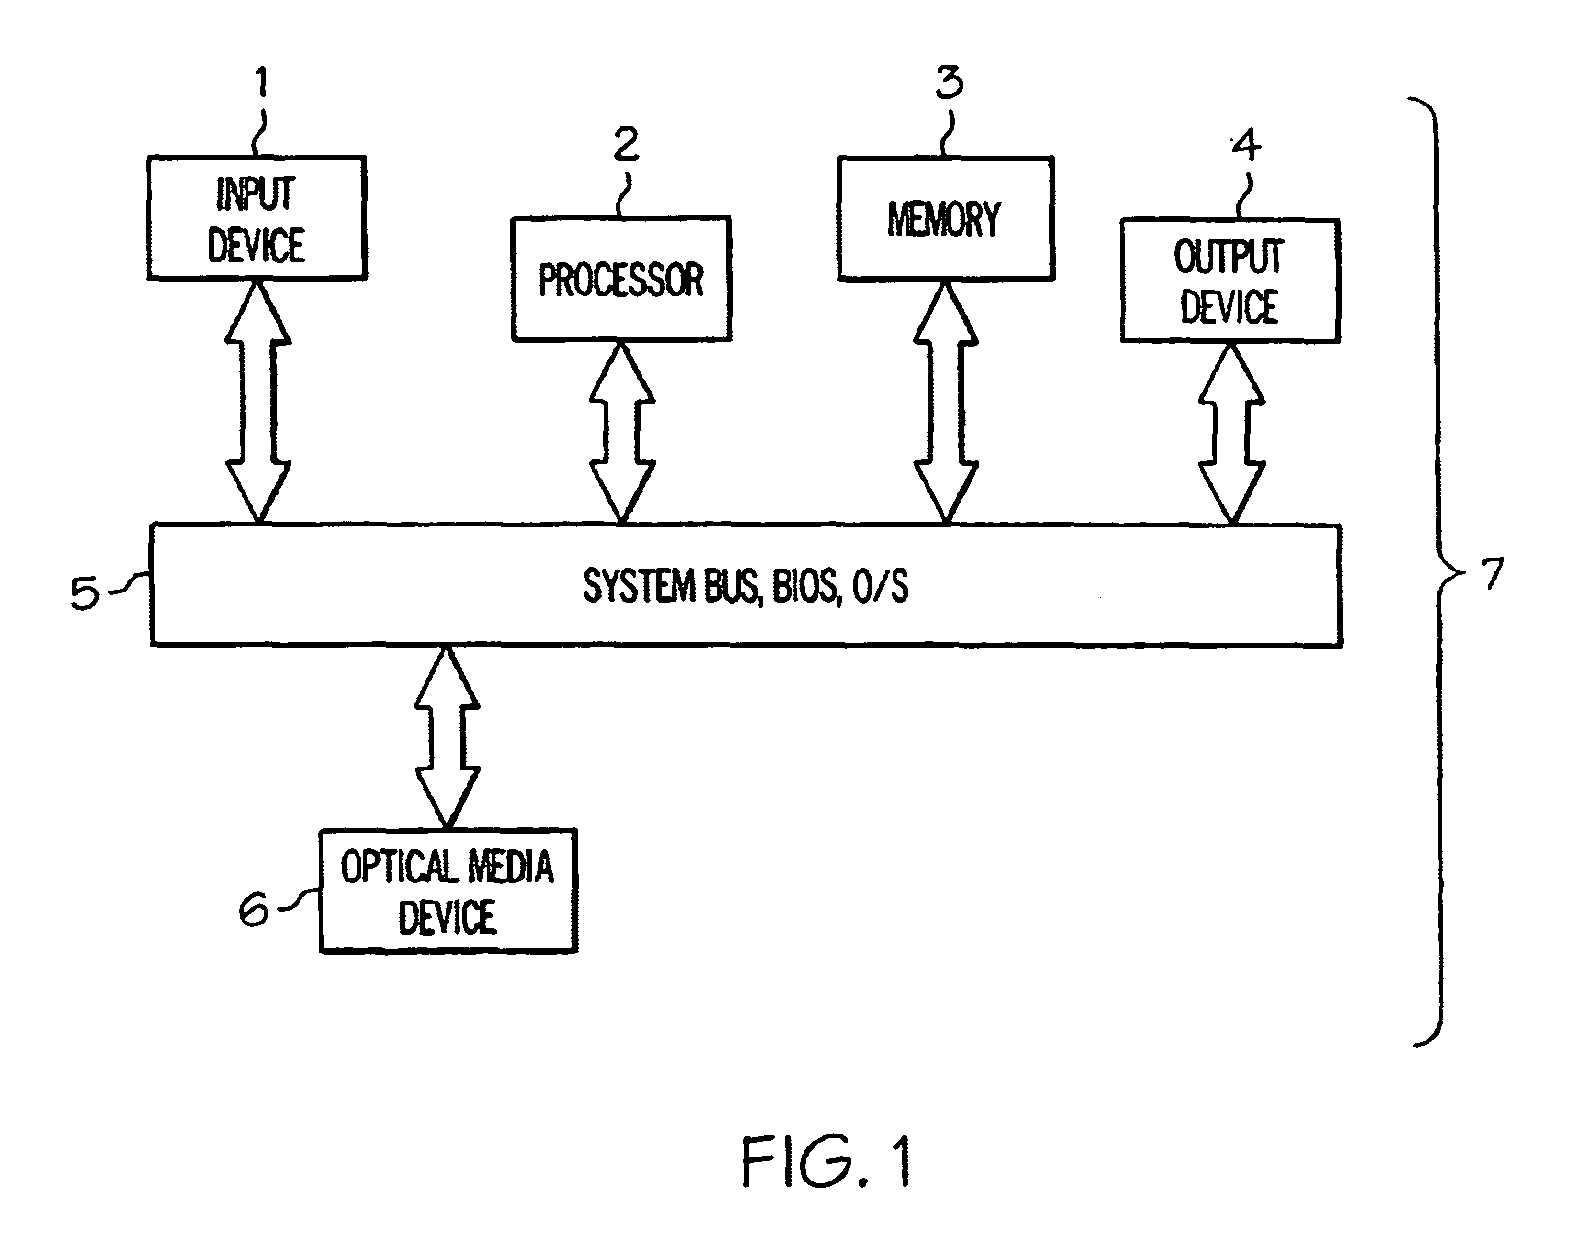 Systems and methods for media authentication